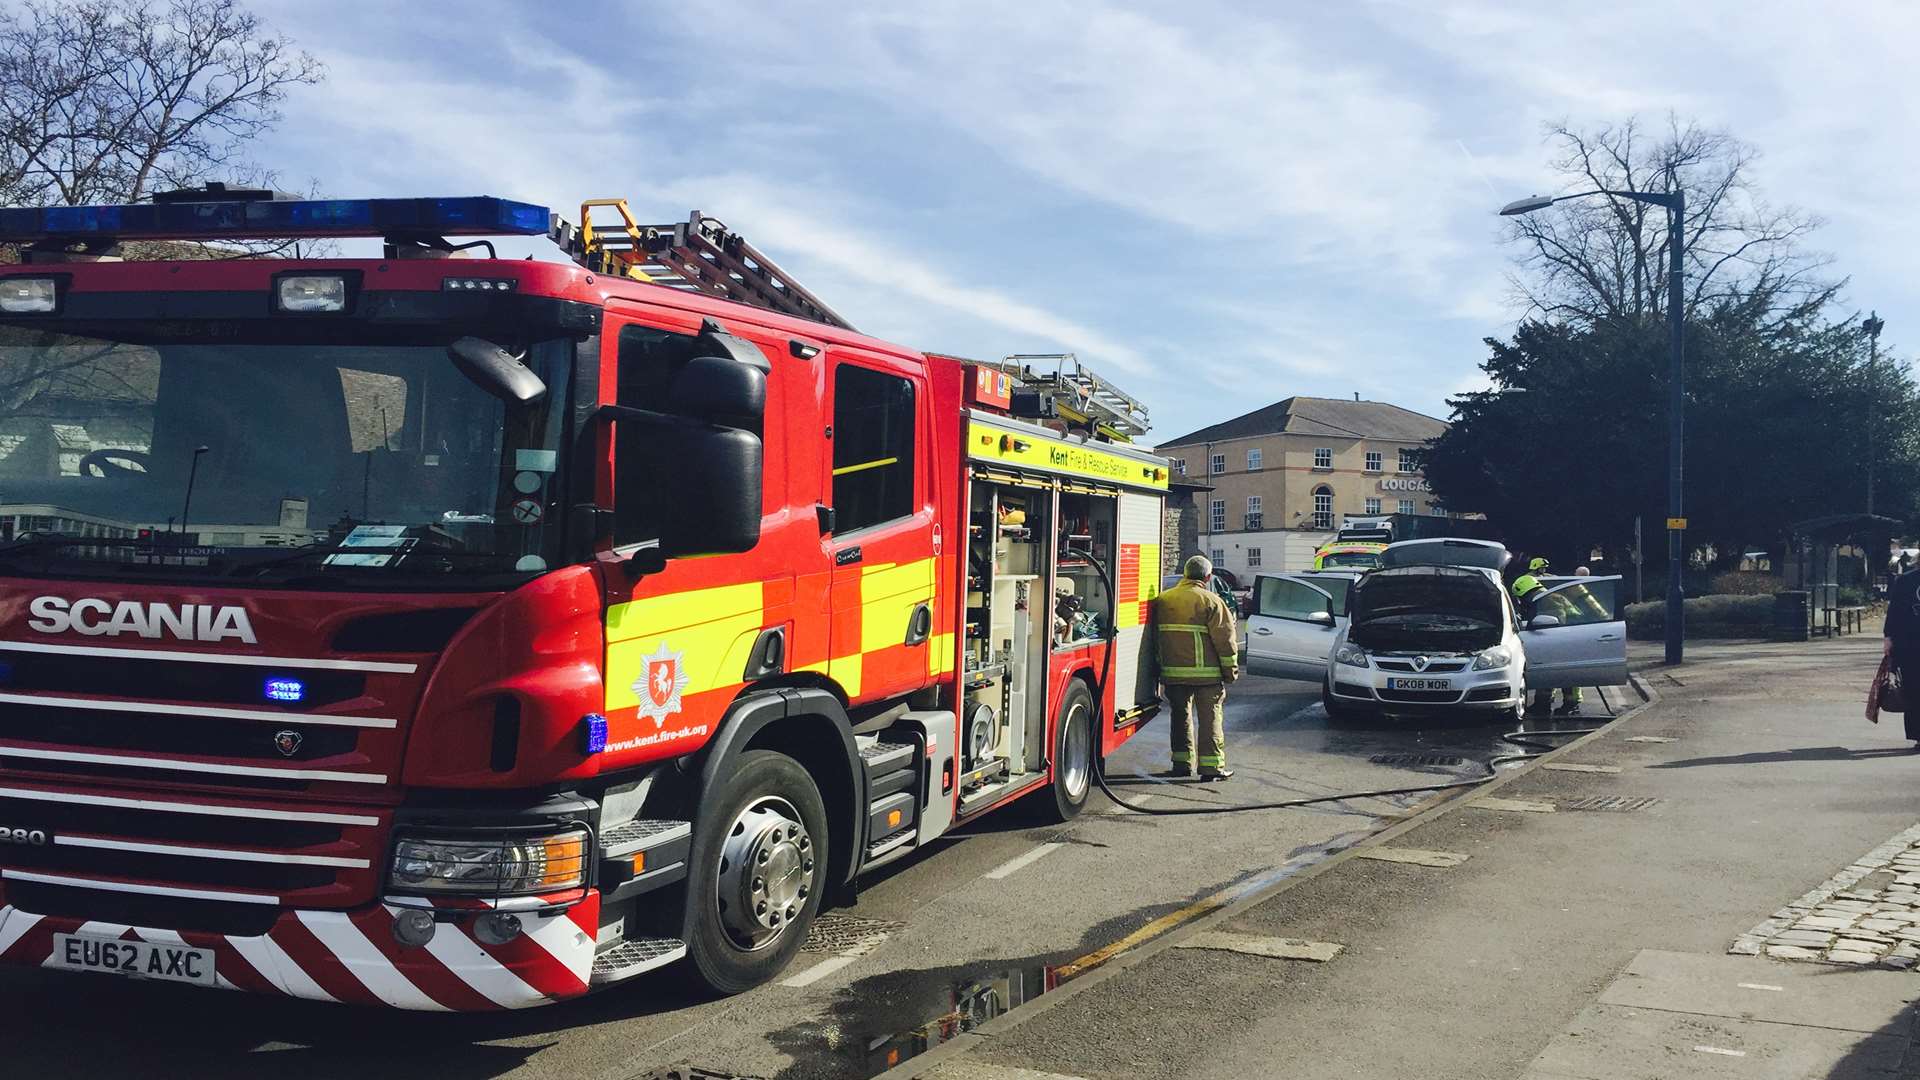 Crews tackle a car fire outside the Archbishop's Palace in Maidstone.